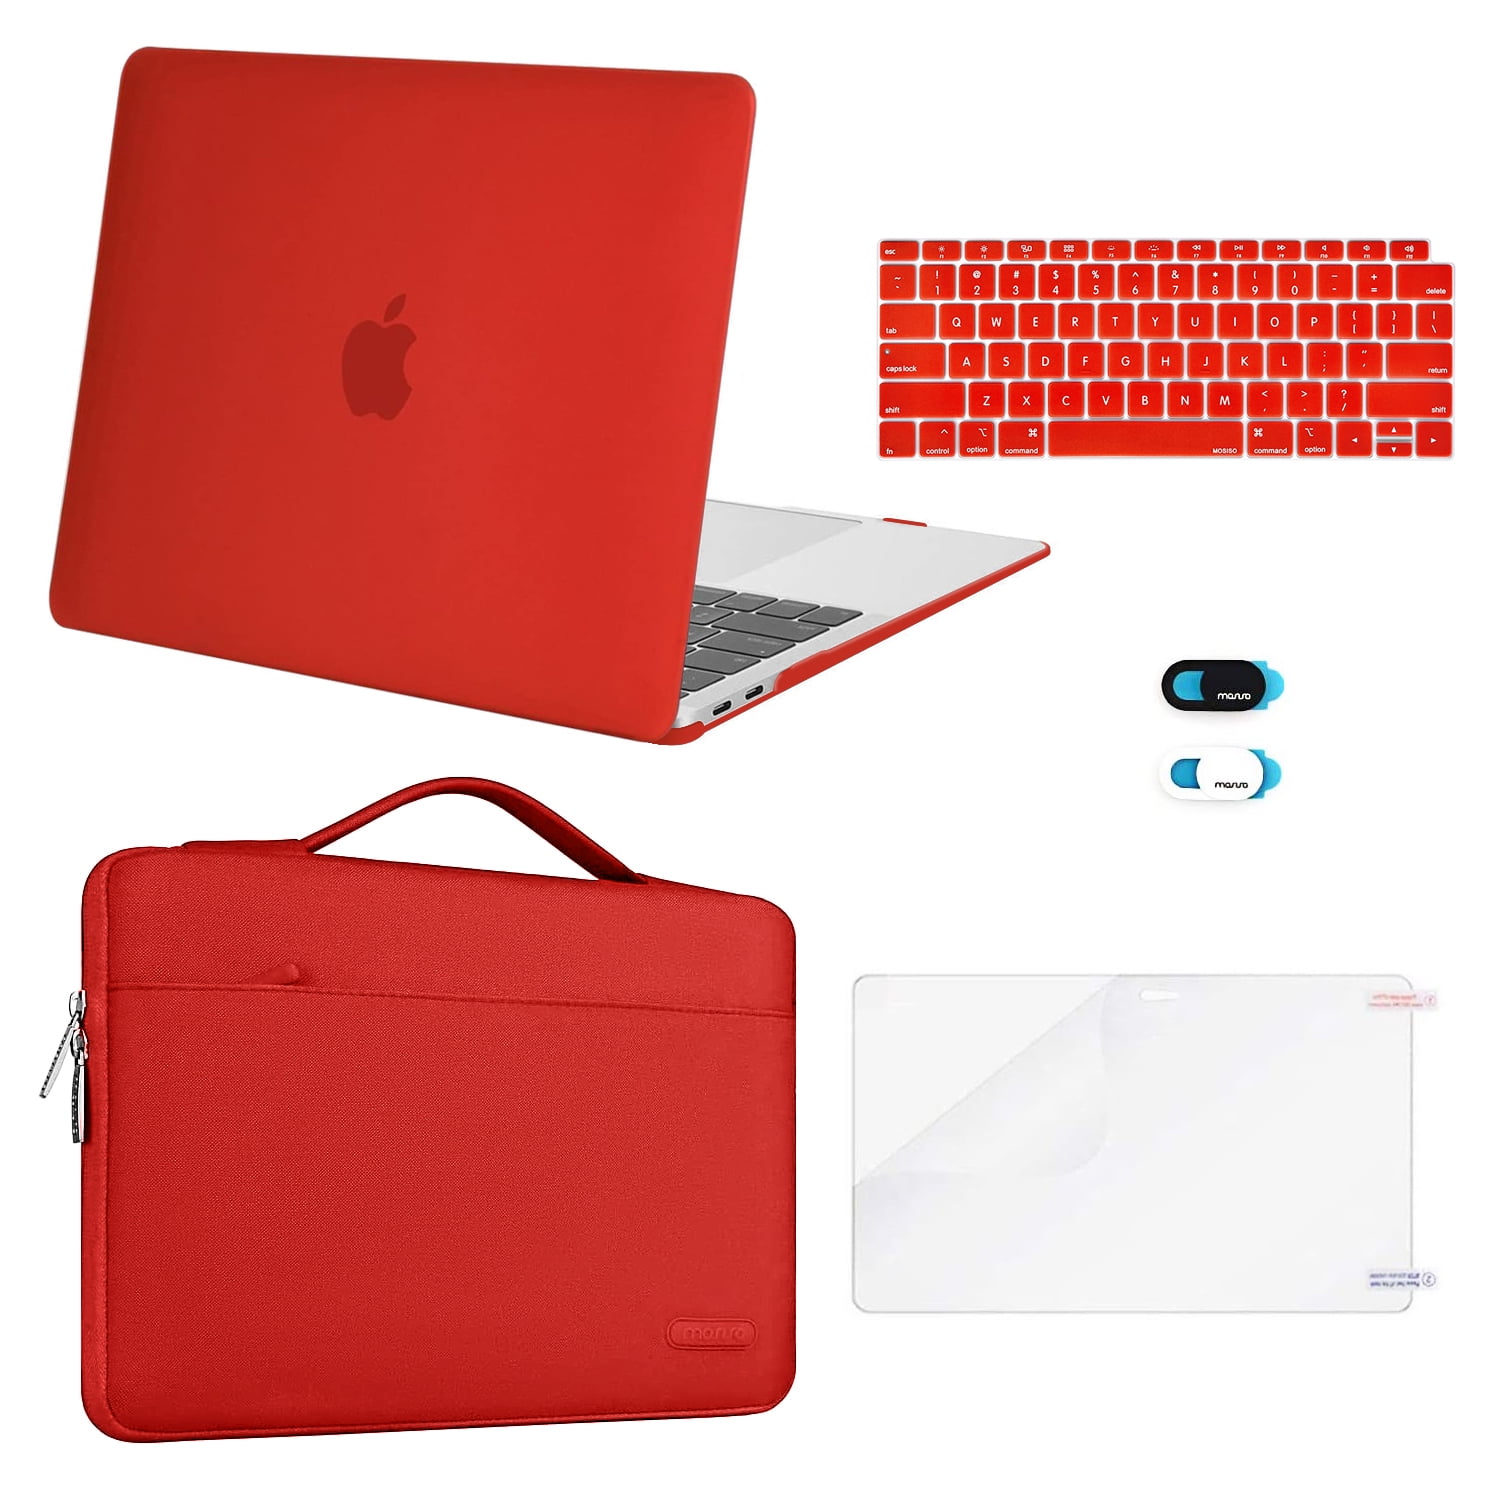 Mosiso 5 in 1 New Macbook Air 13 Inch Case A1932 2019 2018 Release, Hard  Case Shell Cover&Sleeve Bag for Apple MacBook Air 13'' with Retina Display  